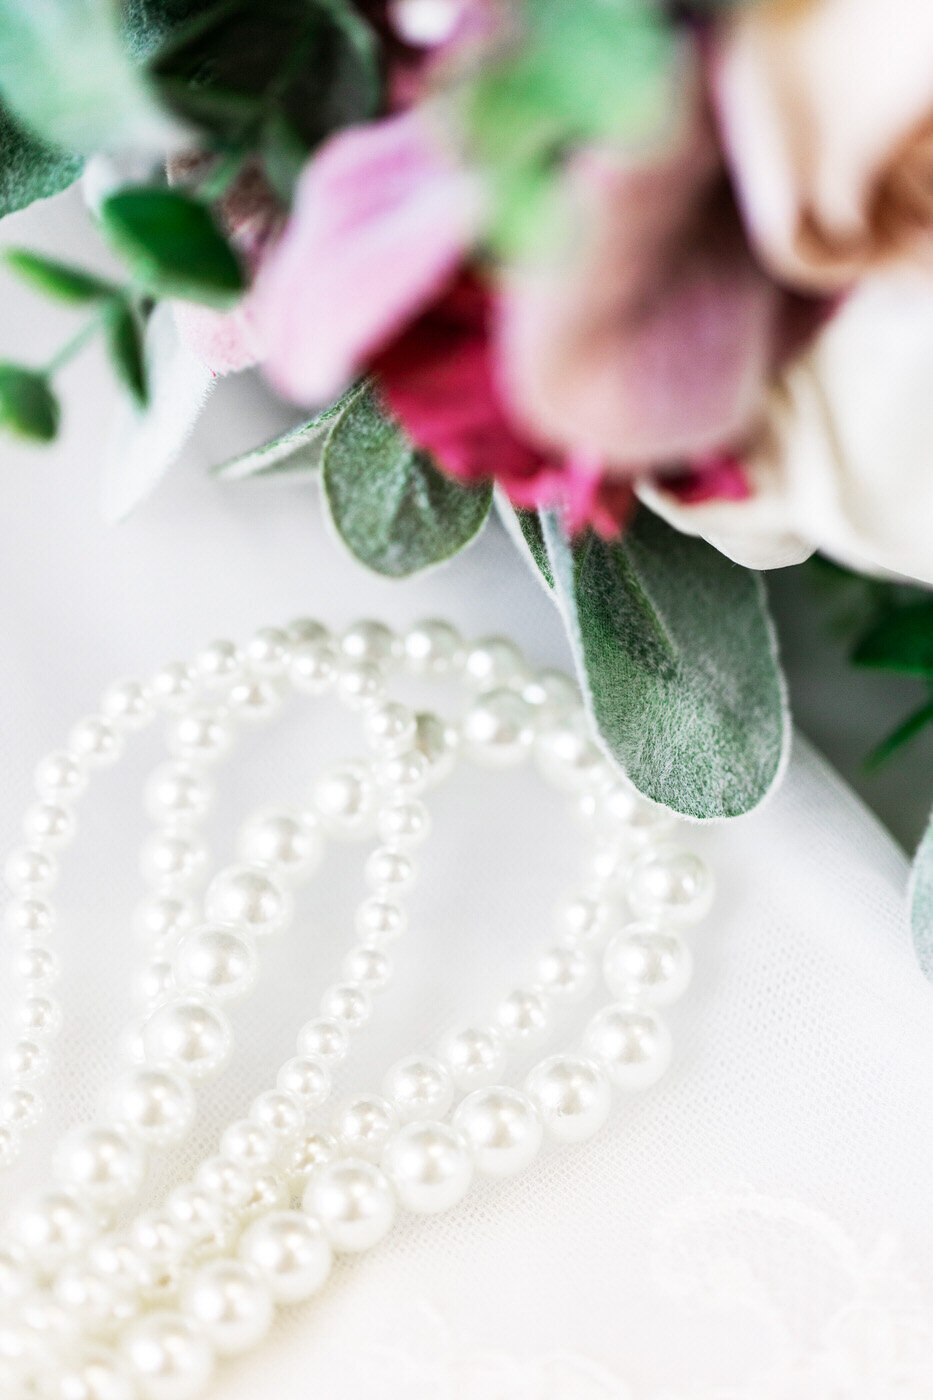 Bridal Pearls Next to Bouquet of Flowers